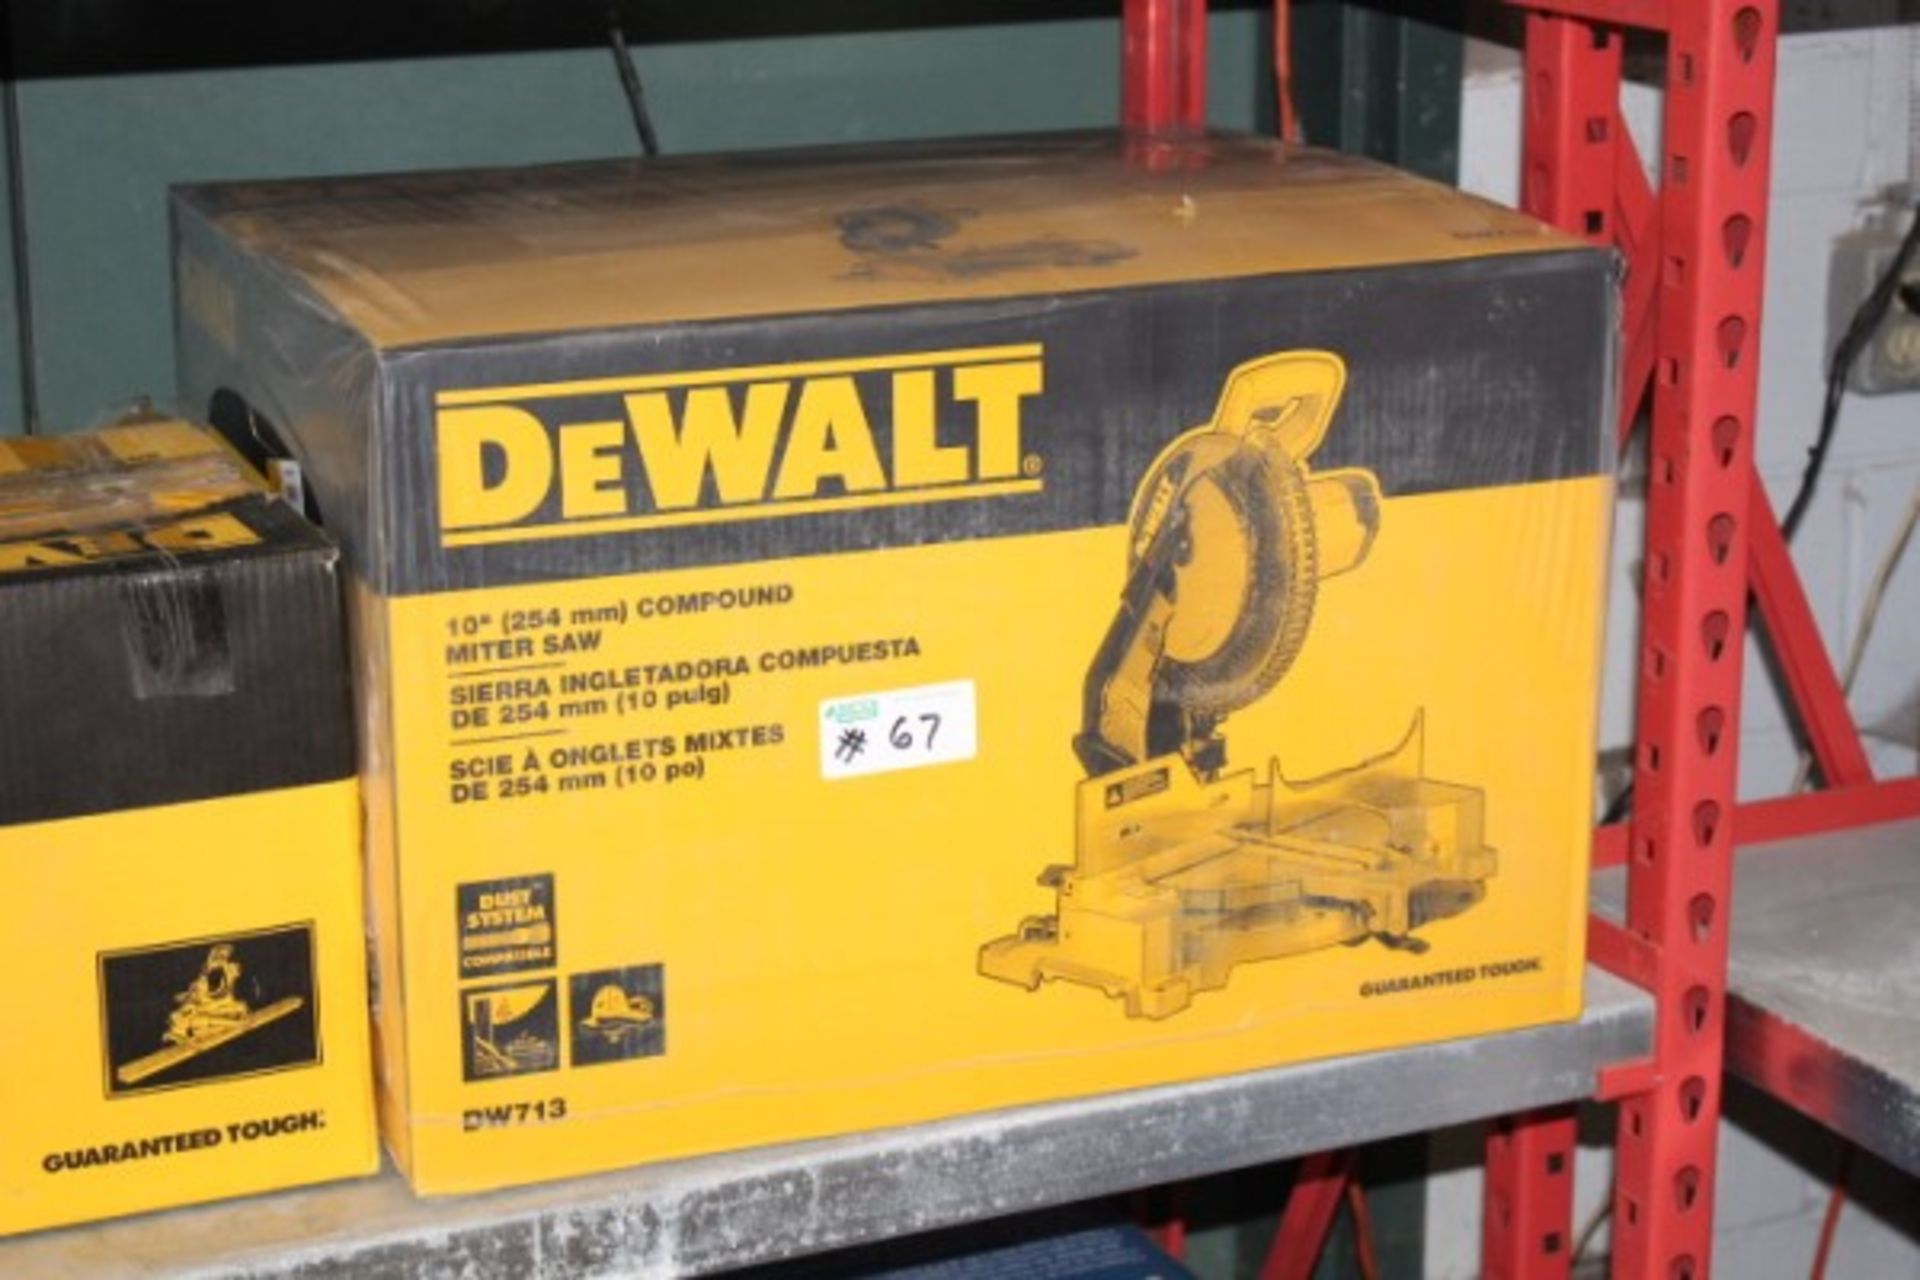 New Dewalt 10" Compound Miter Saw and Compack Mitre Saw Stand